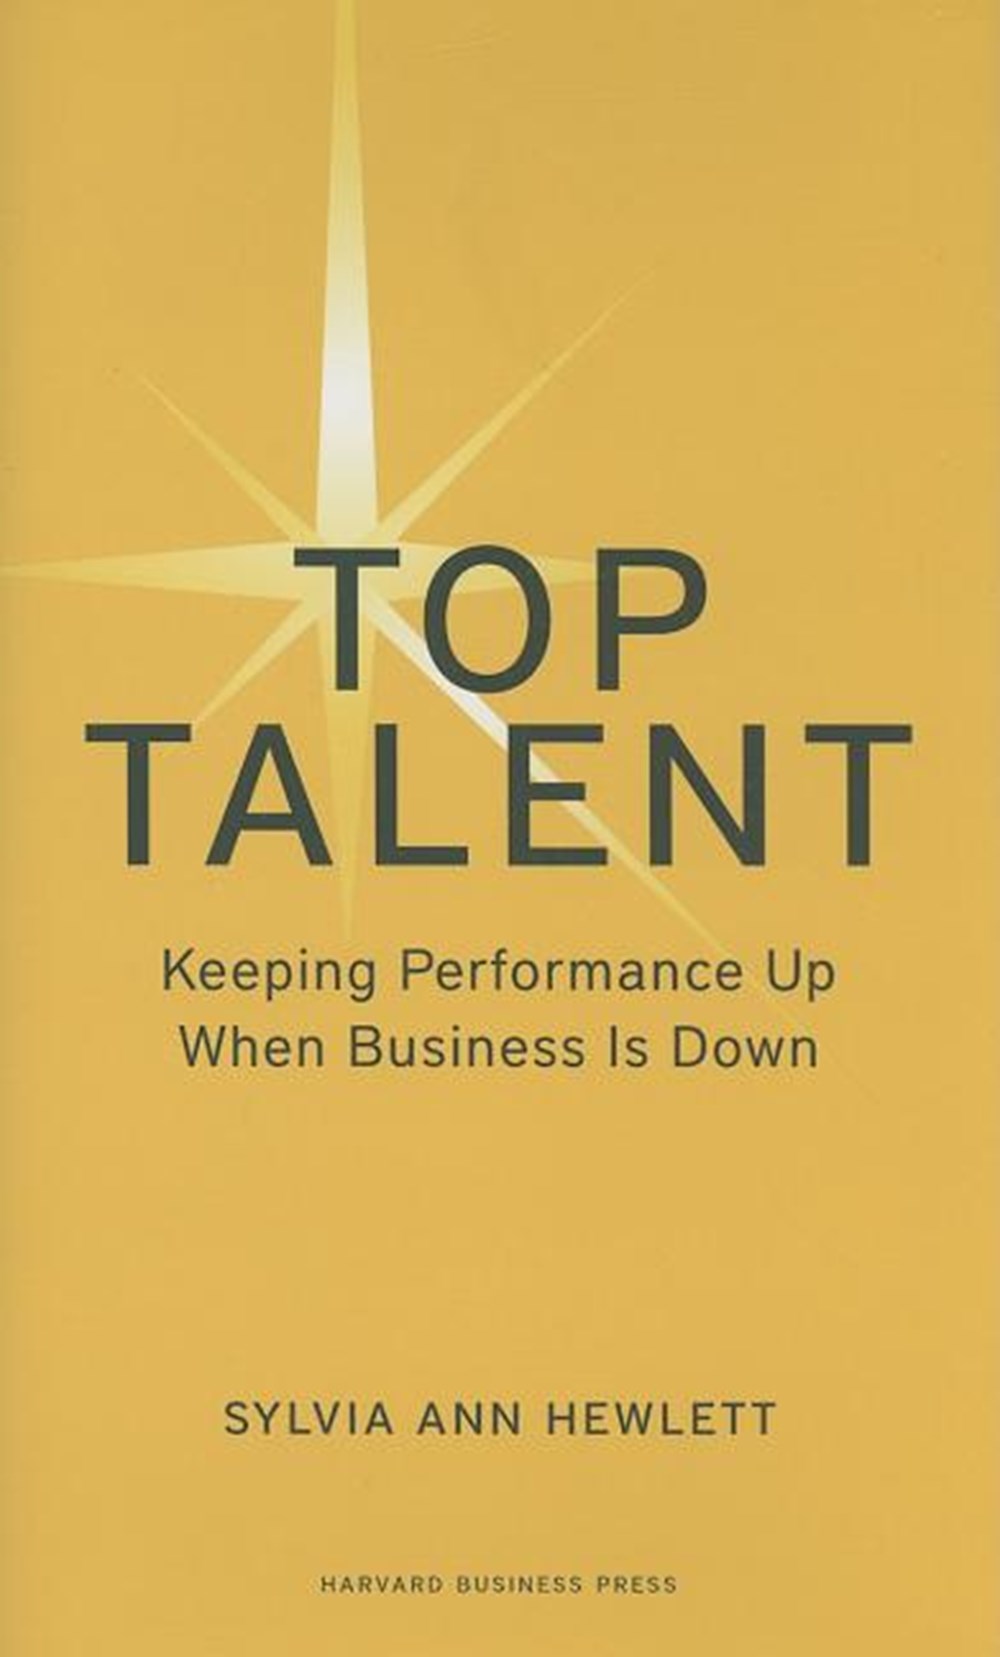 Top Talent Keeping Performance Up When Business Is Down